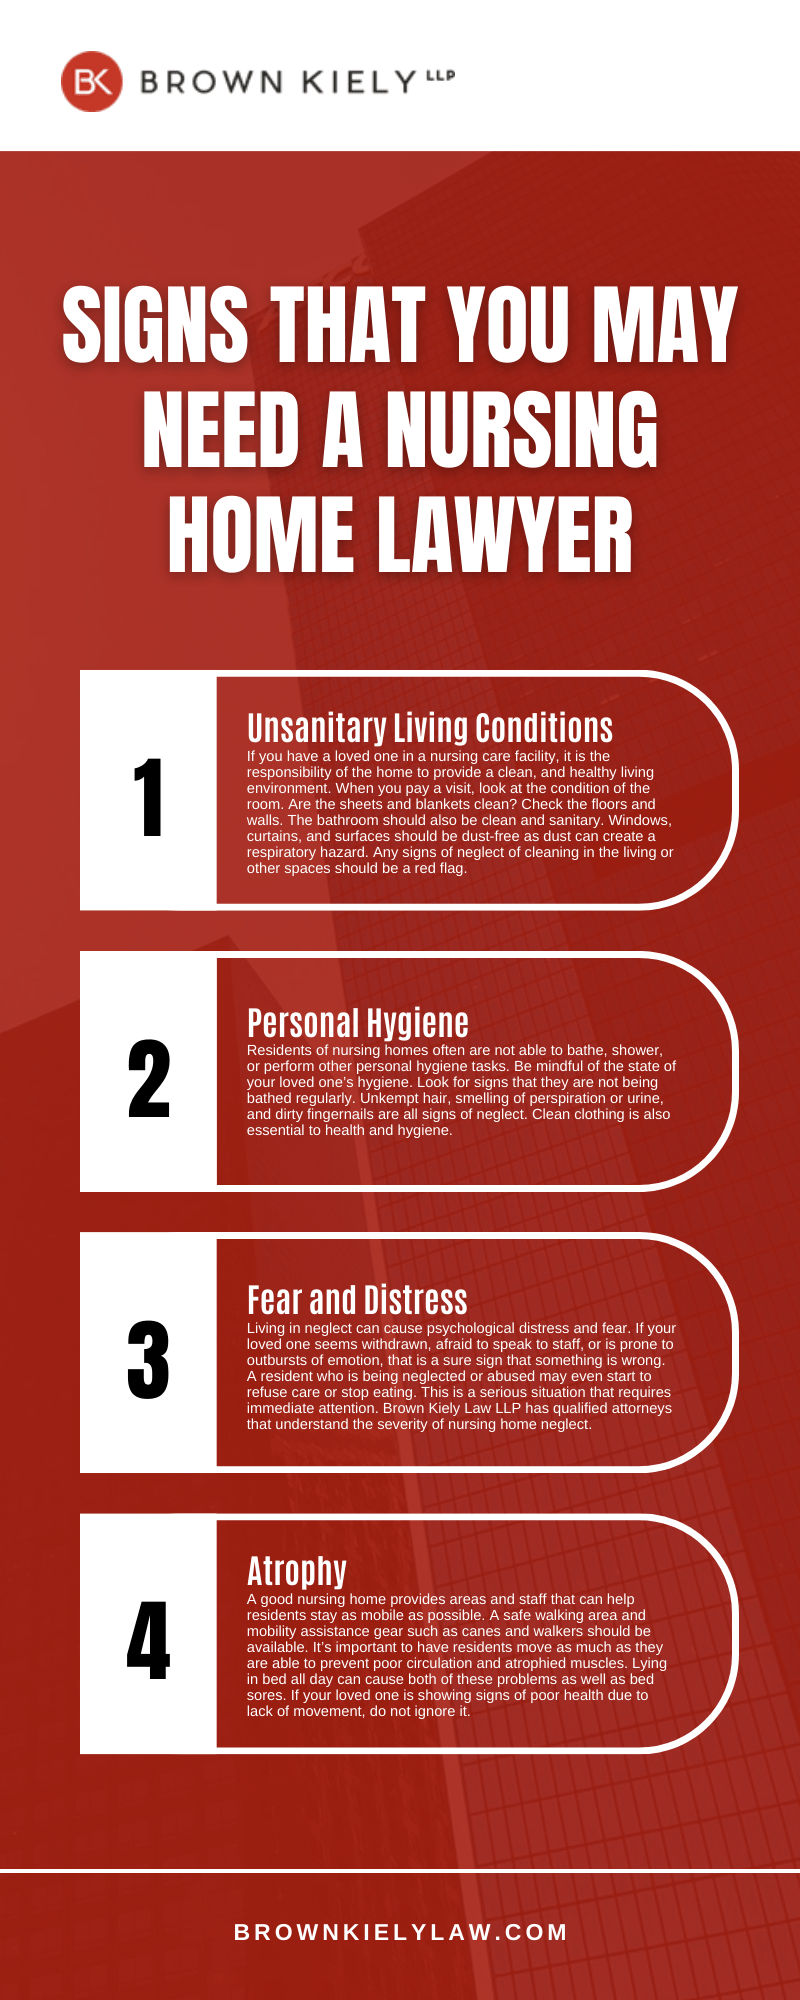 Signs that you may need a Nursing Home Lawyer Infographic